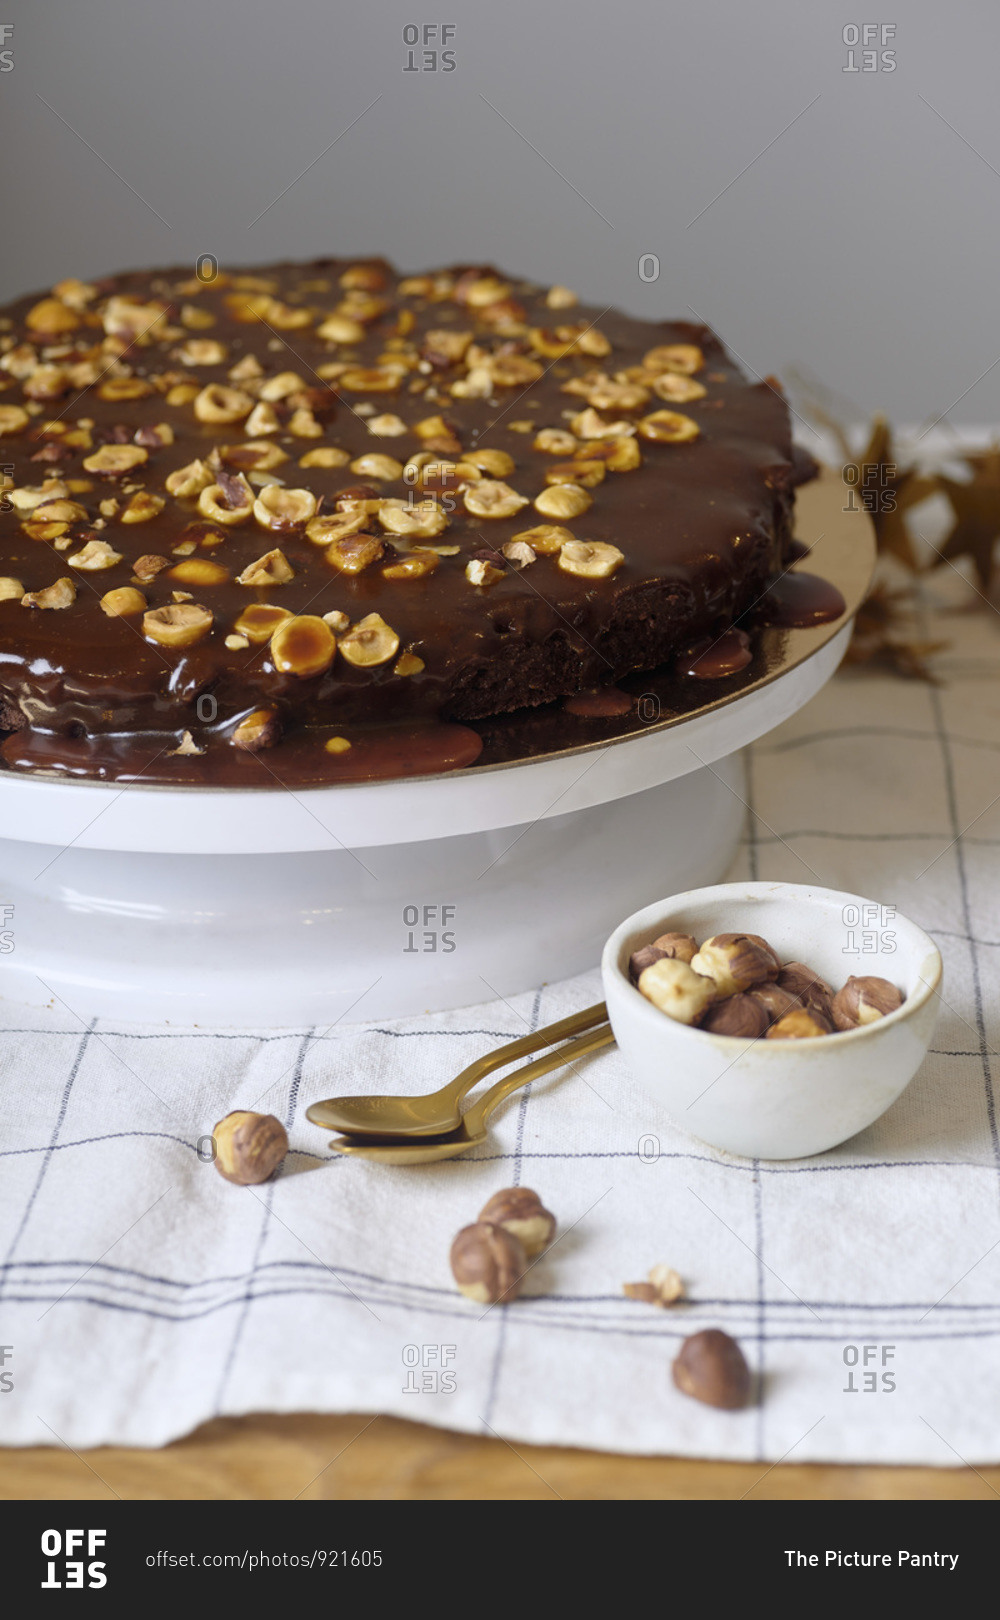 Vegan brownie cake with hazelnuts and salted caramel n white cake stand